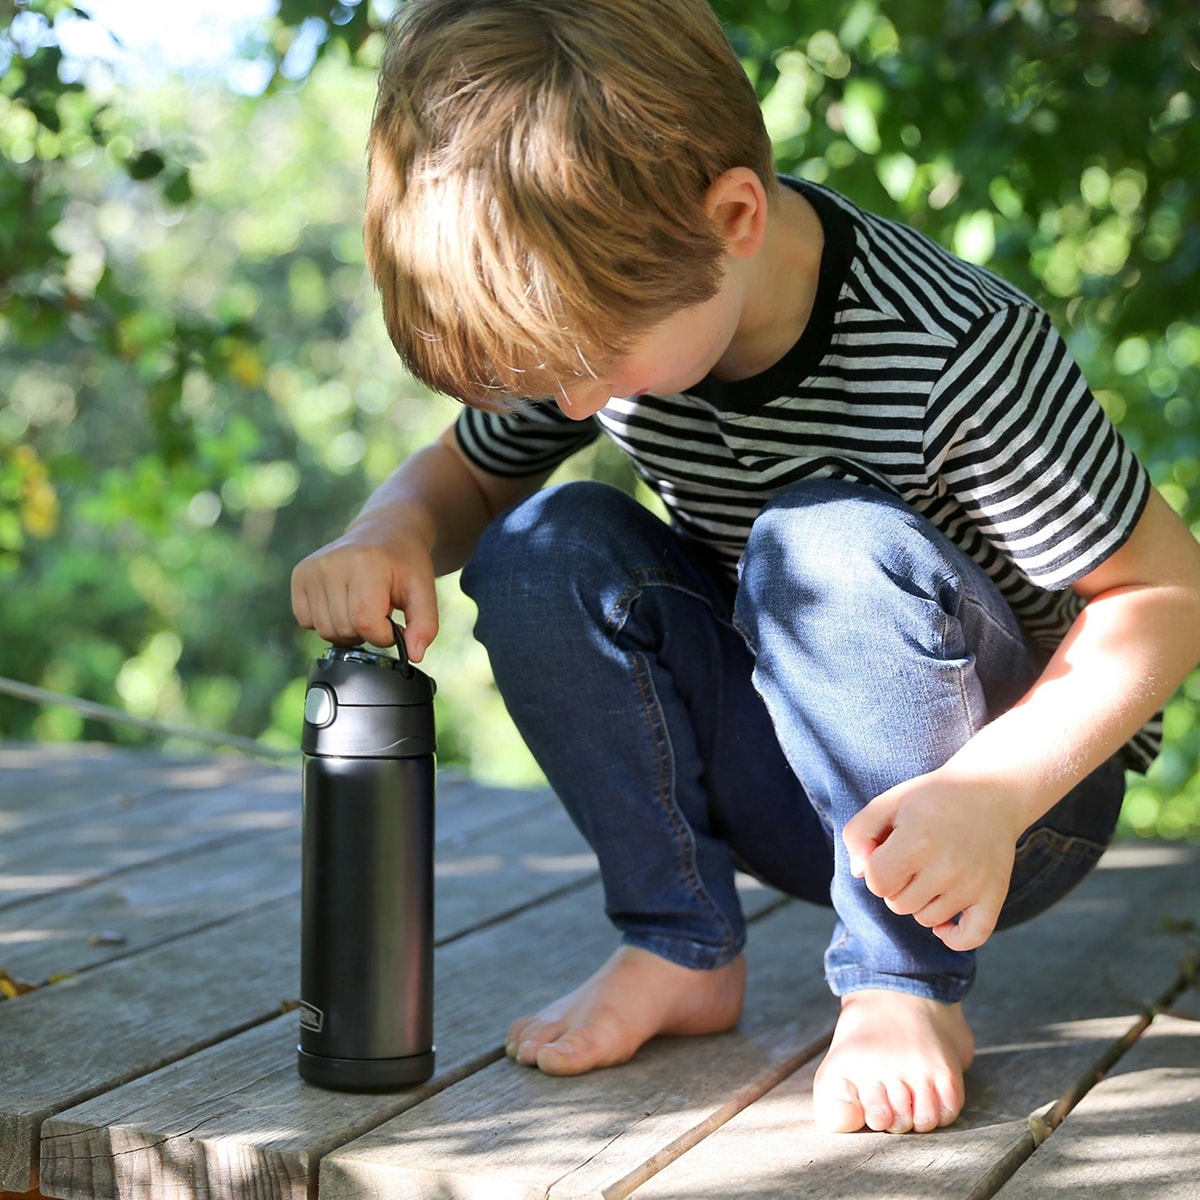 https://ak1.ostkcdn.com/images/products/is/images/direct/44667bc78a7bc61ff1032cd9bf373da7b49d87aa/Thermos-16-oz.-Kid%27s-Funtainer-Insulated-Stainless-Steel-Water-Bottle.jpg